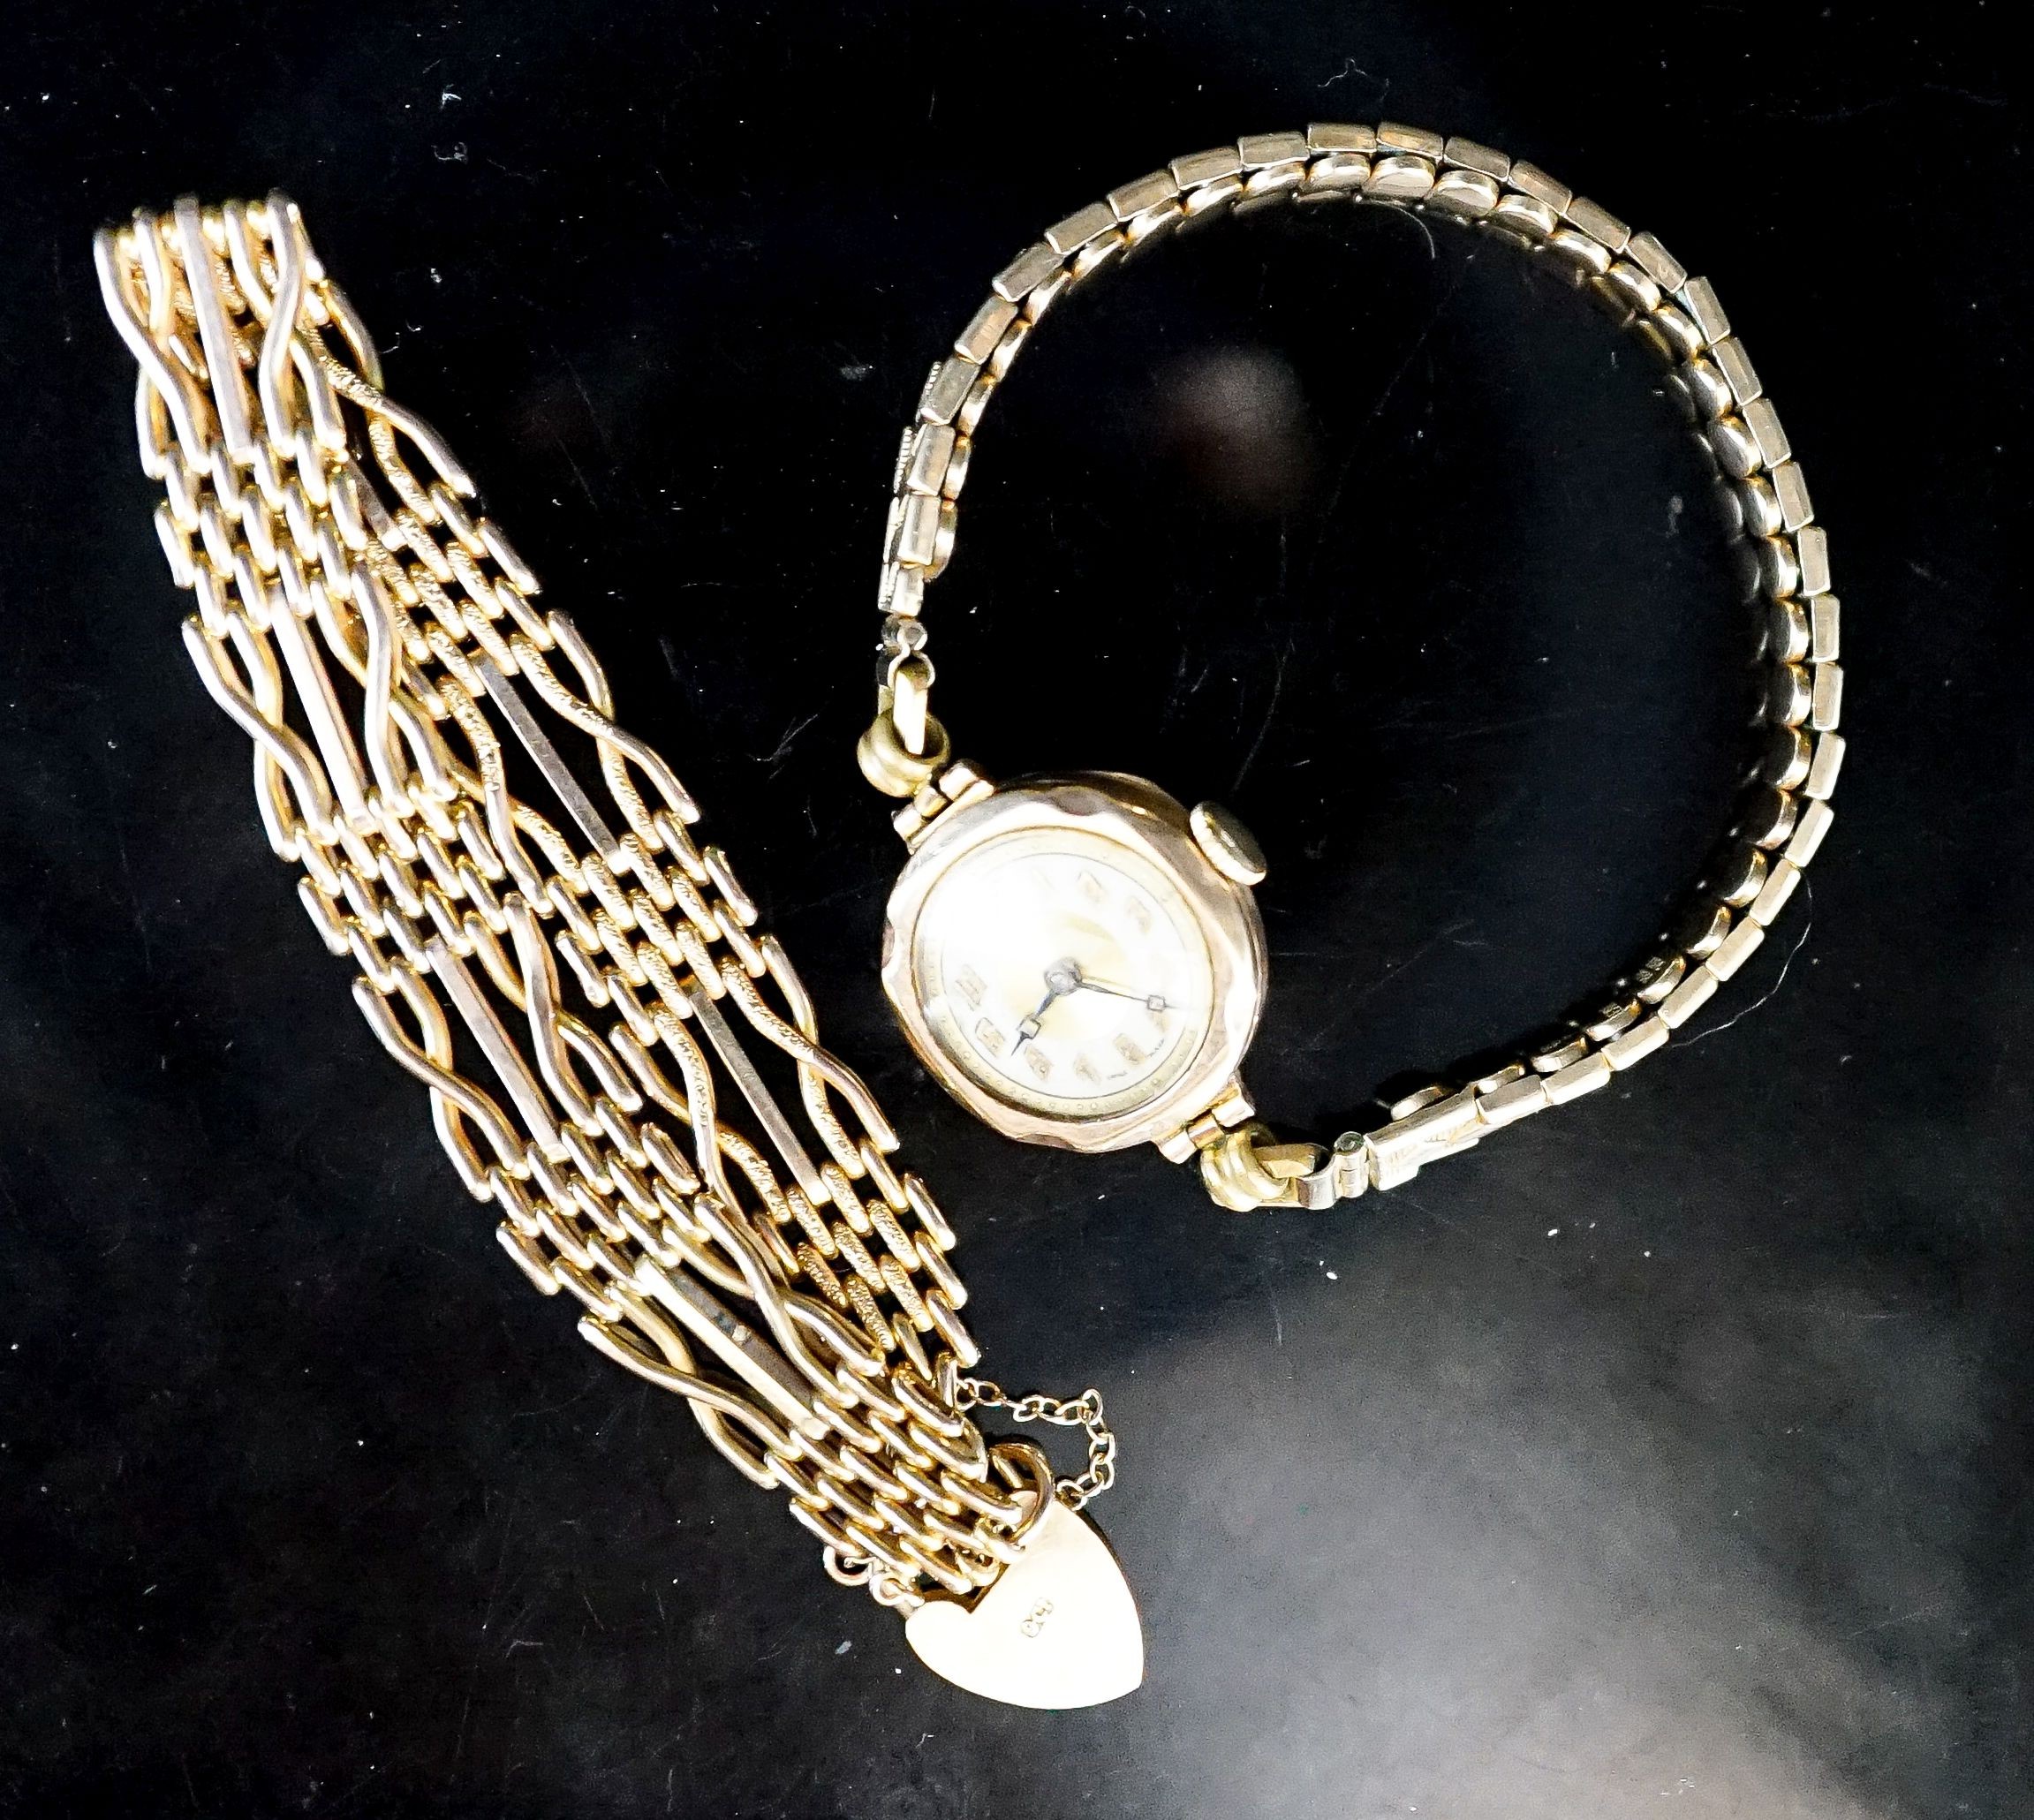 A 9ct. yellow gold chain bracelet, 9.7 grams and a lady's 9ct gold watch on a 9ct and metal core bracelet.